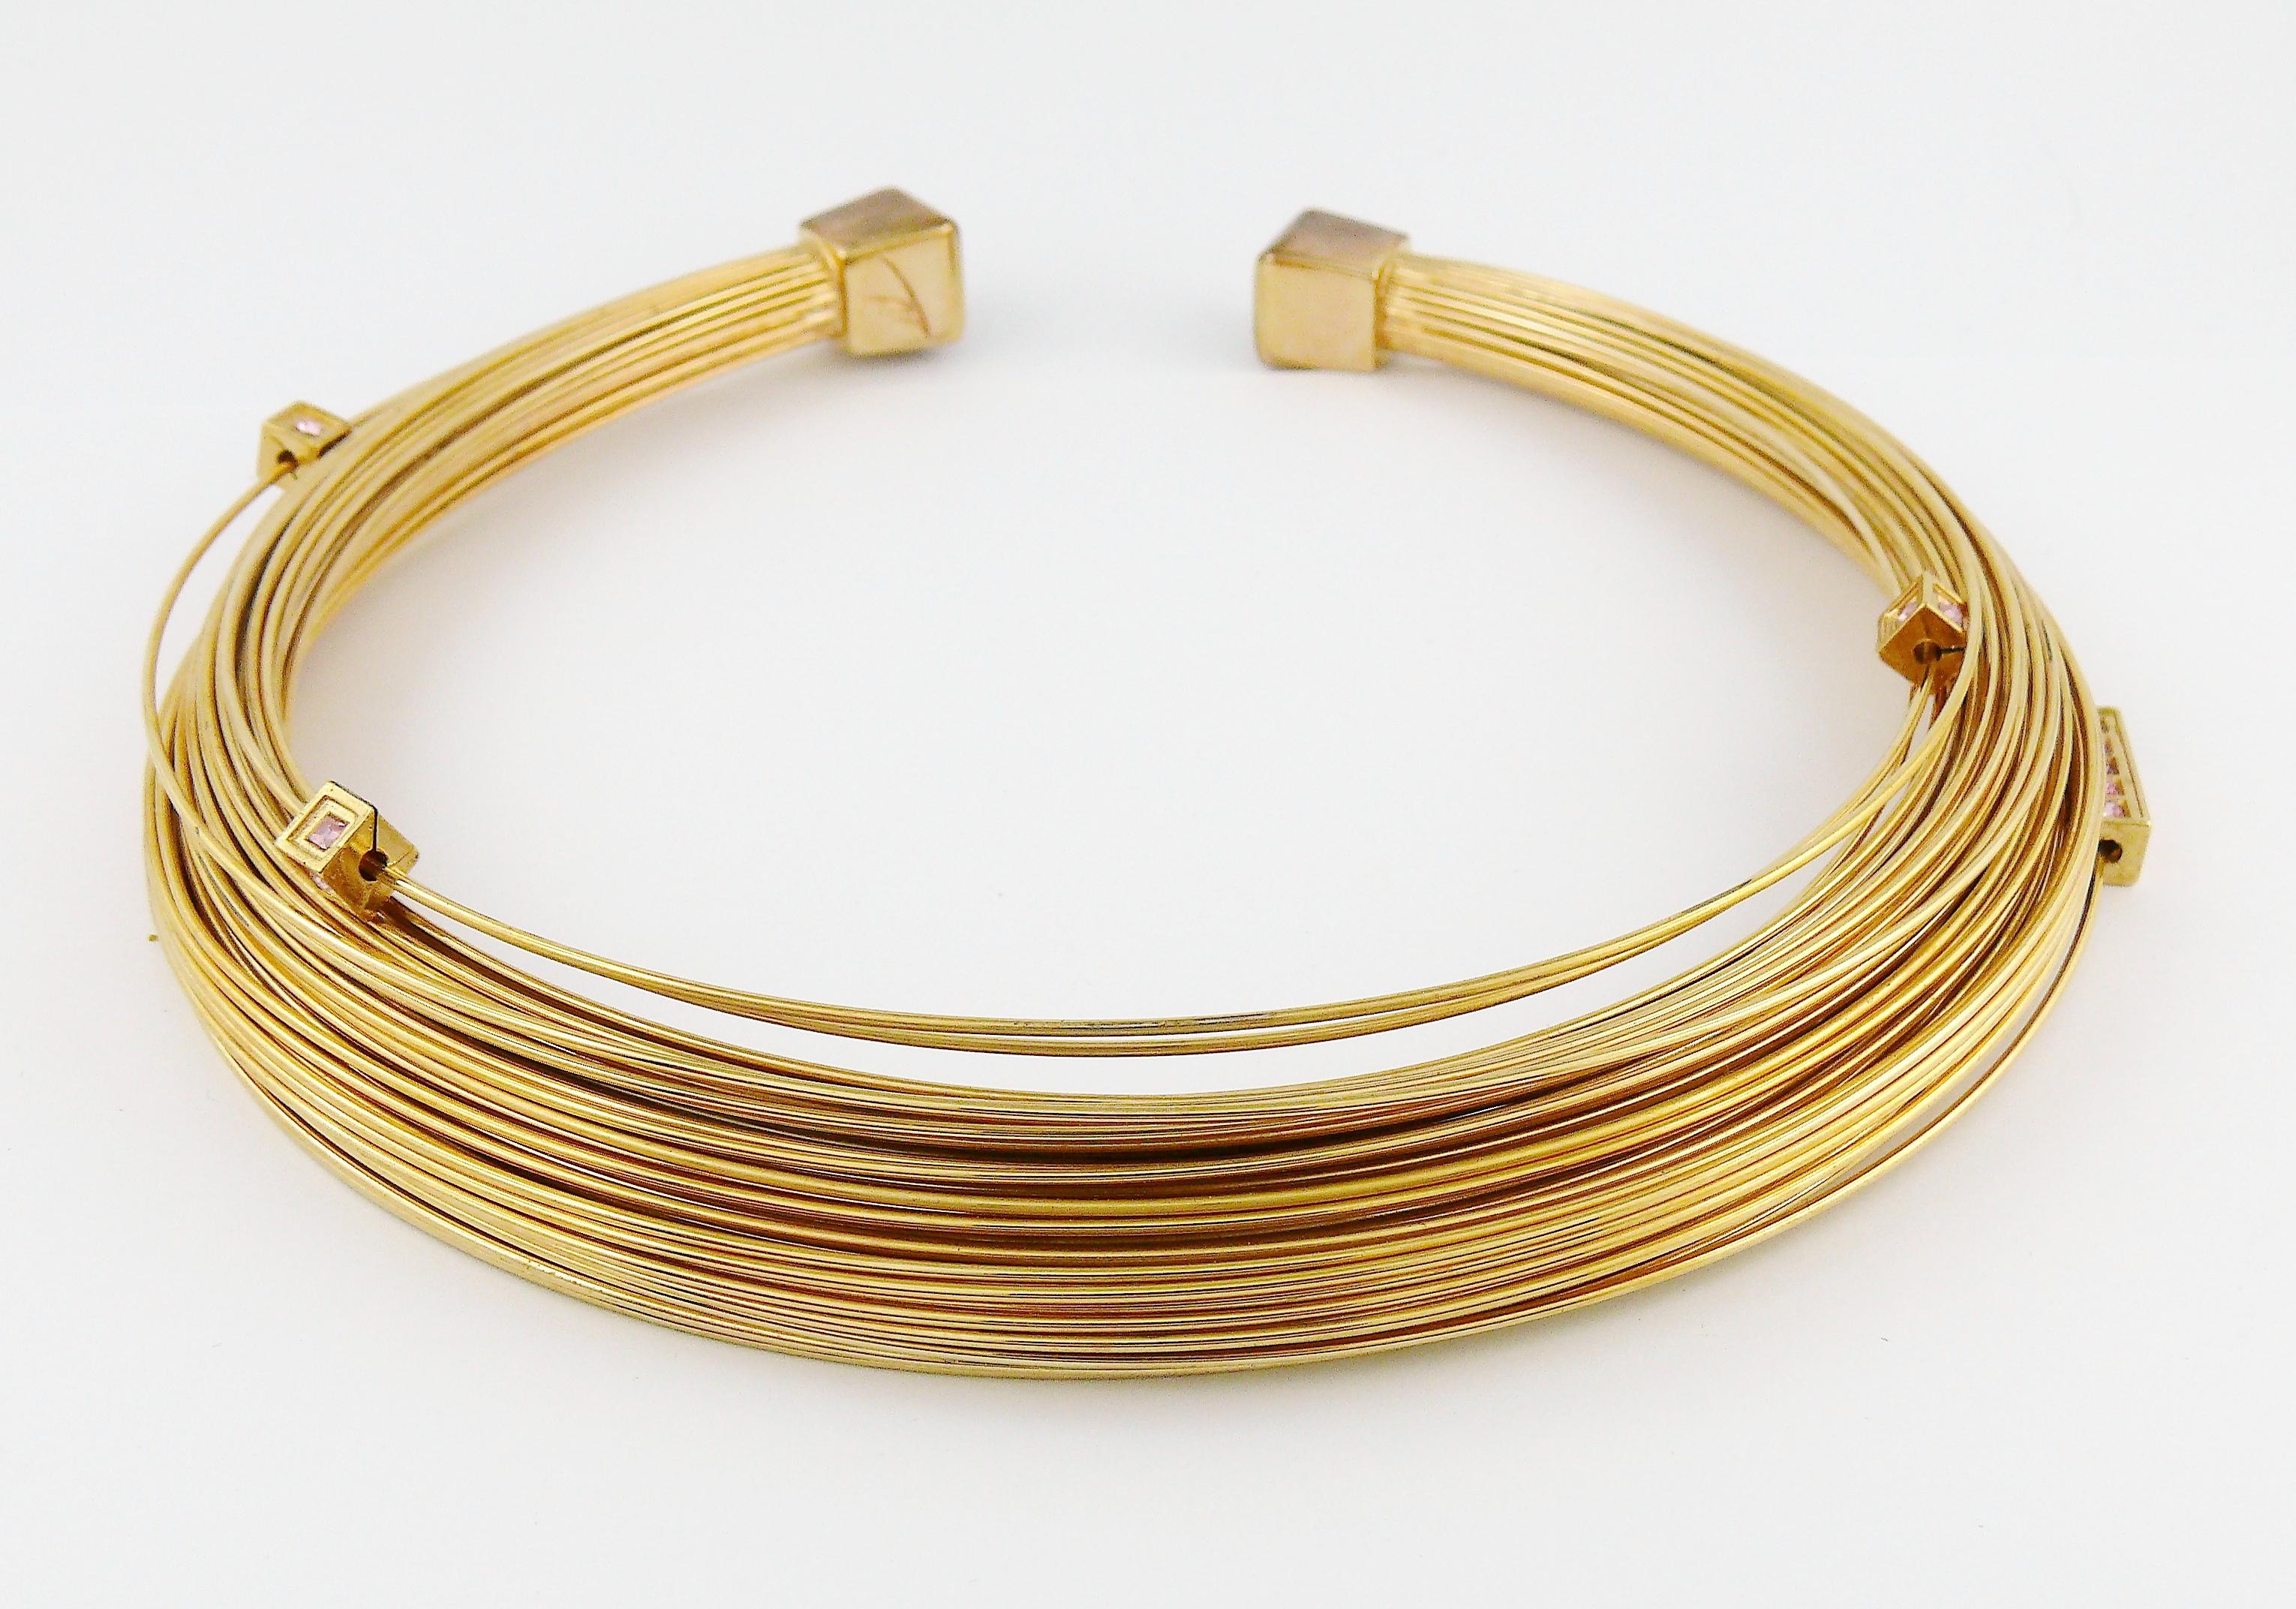 Thierry Mugler Vintage Gold Toned Bundled Wires Choker Necklace In Good Condition For Sale In Nice, FR